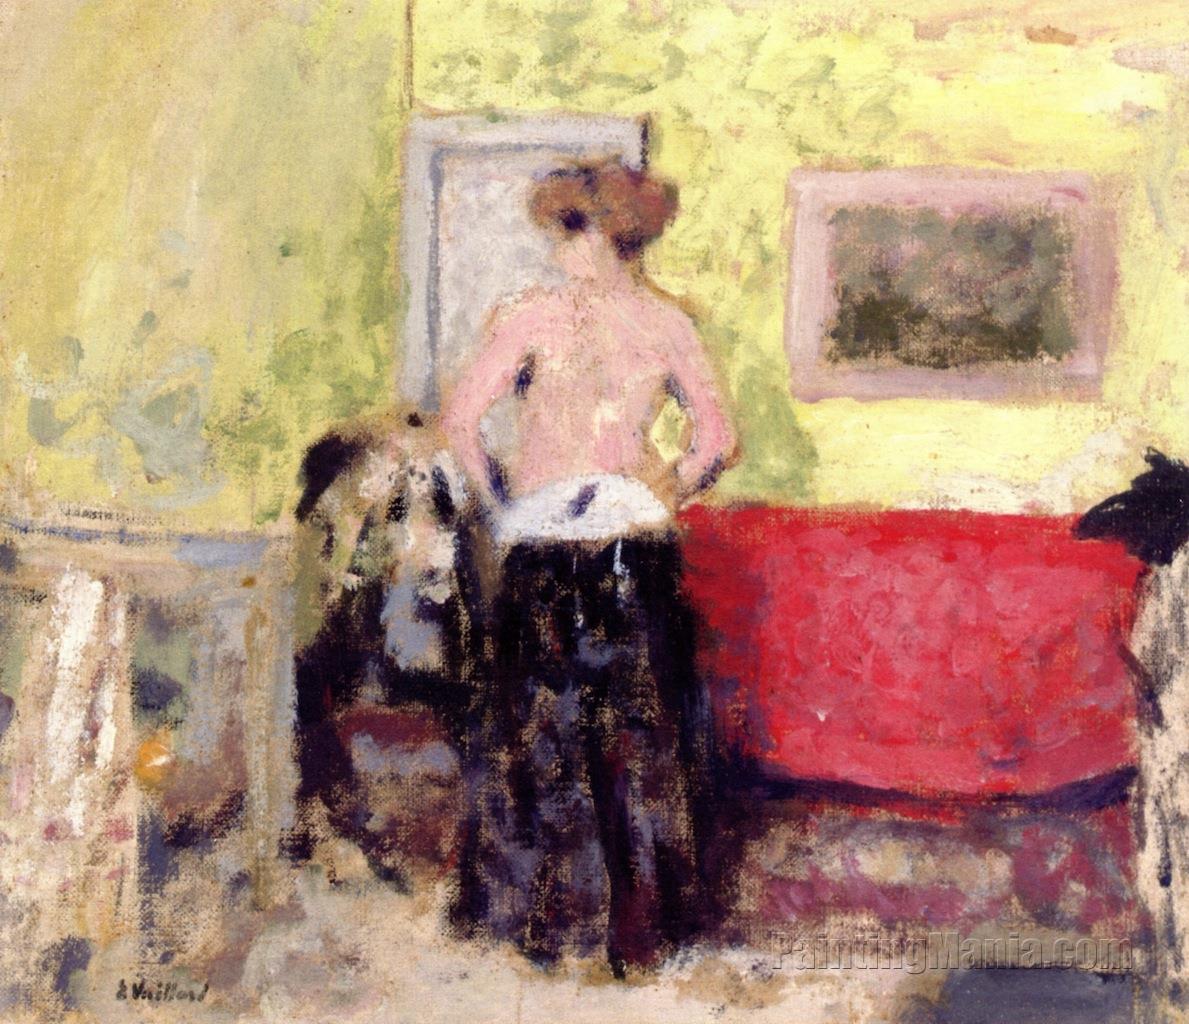 Woman Undressing, from Behind